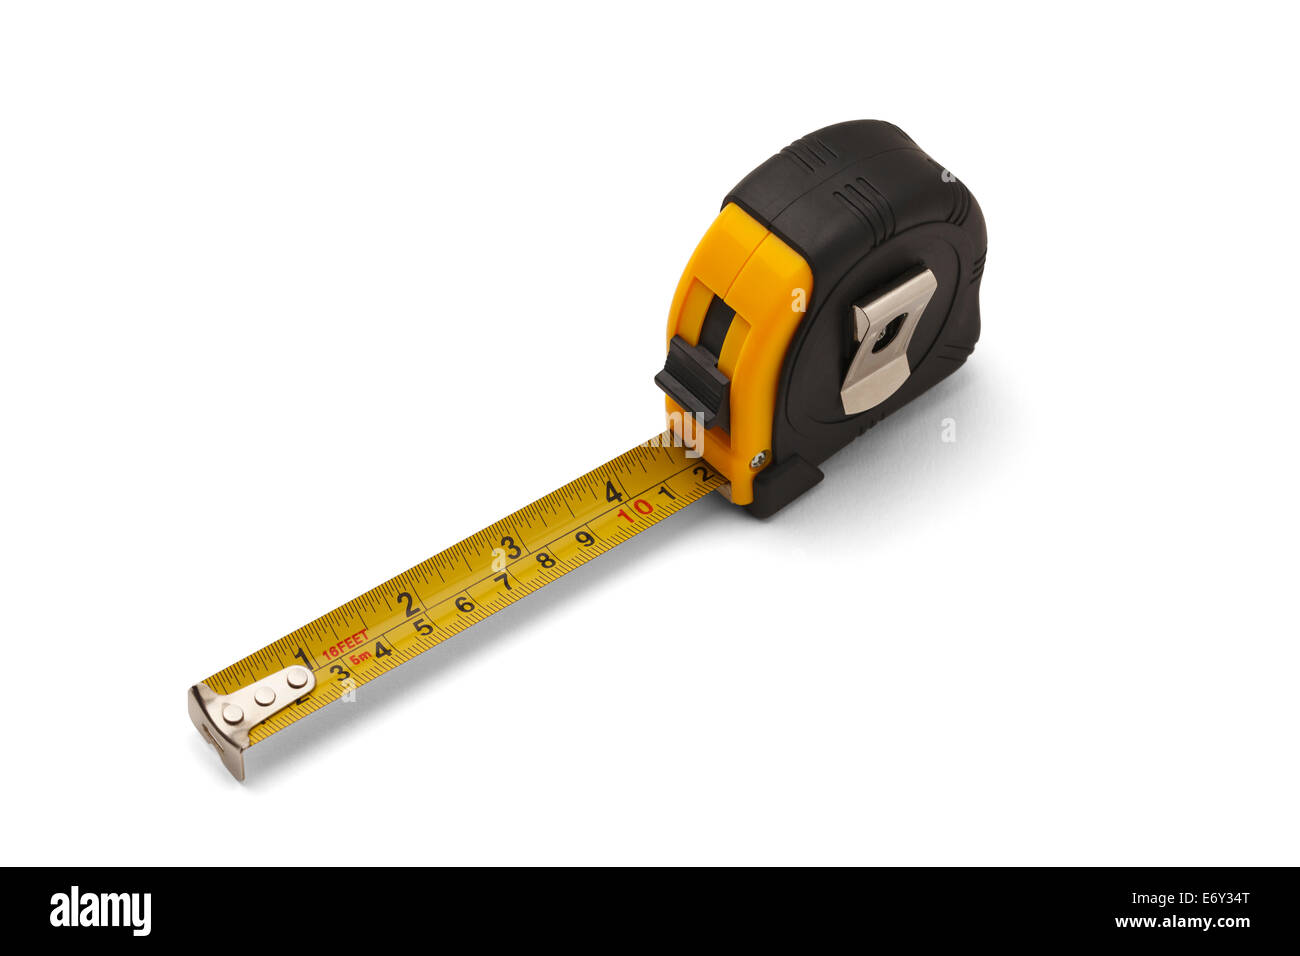 https://c8.alamy.com/comp/E6Y34T/yellow-measuring-tape-with-black-cover-isolated-on-a-white-background-E6Y34T.jpg